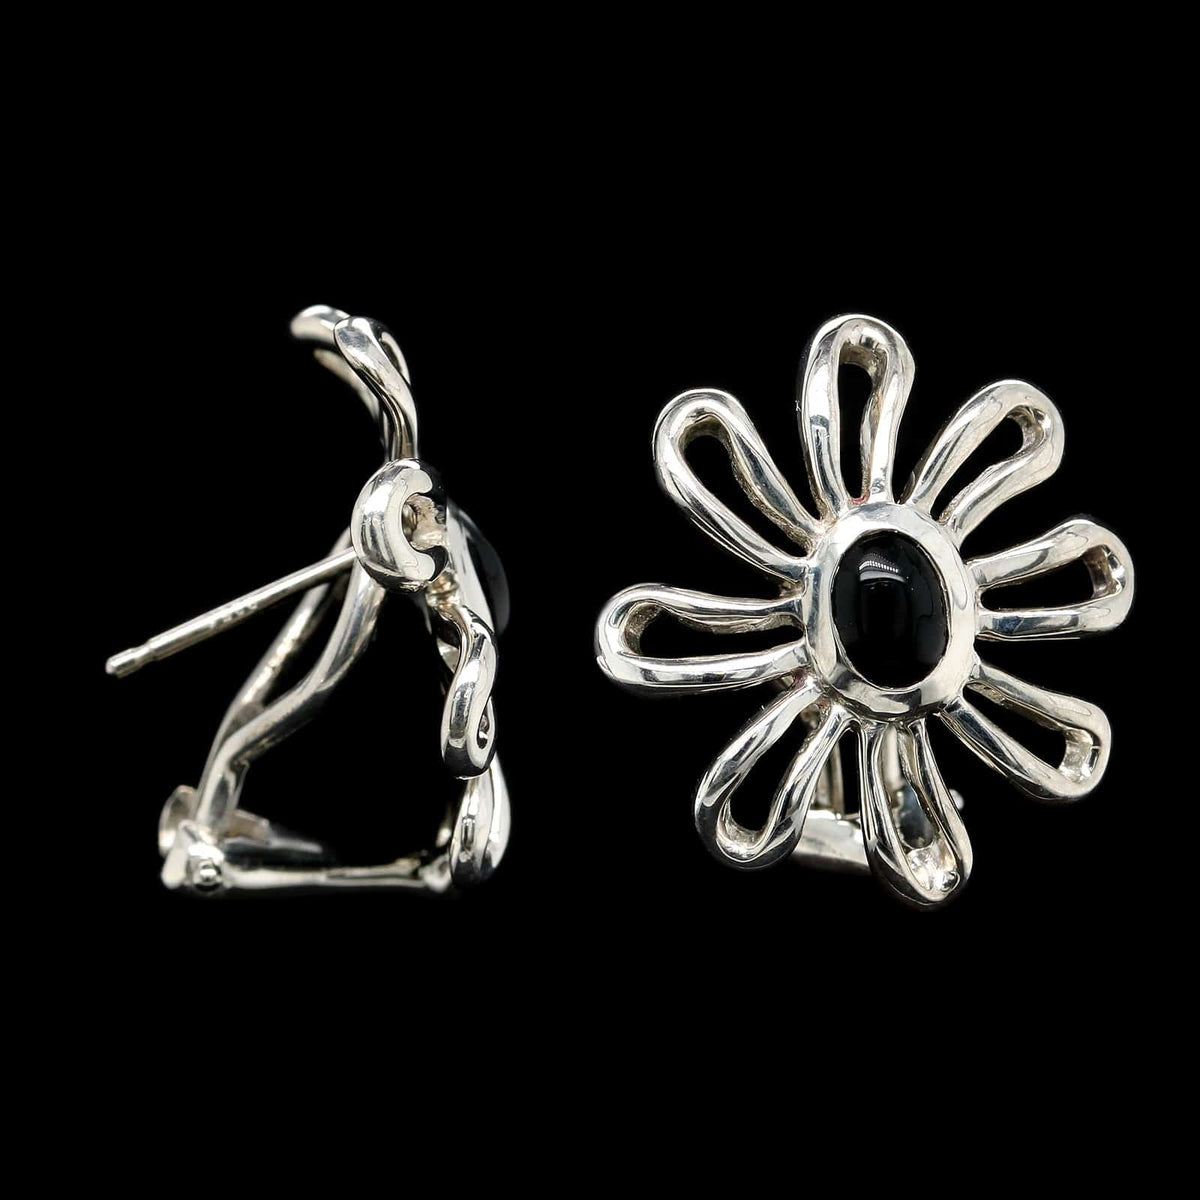 Tiffany & Co. Paloma Picasso Sterling Silver Estate Onyx Daisy Earrings